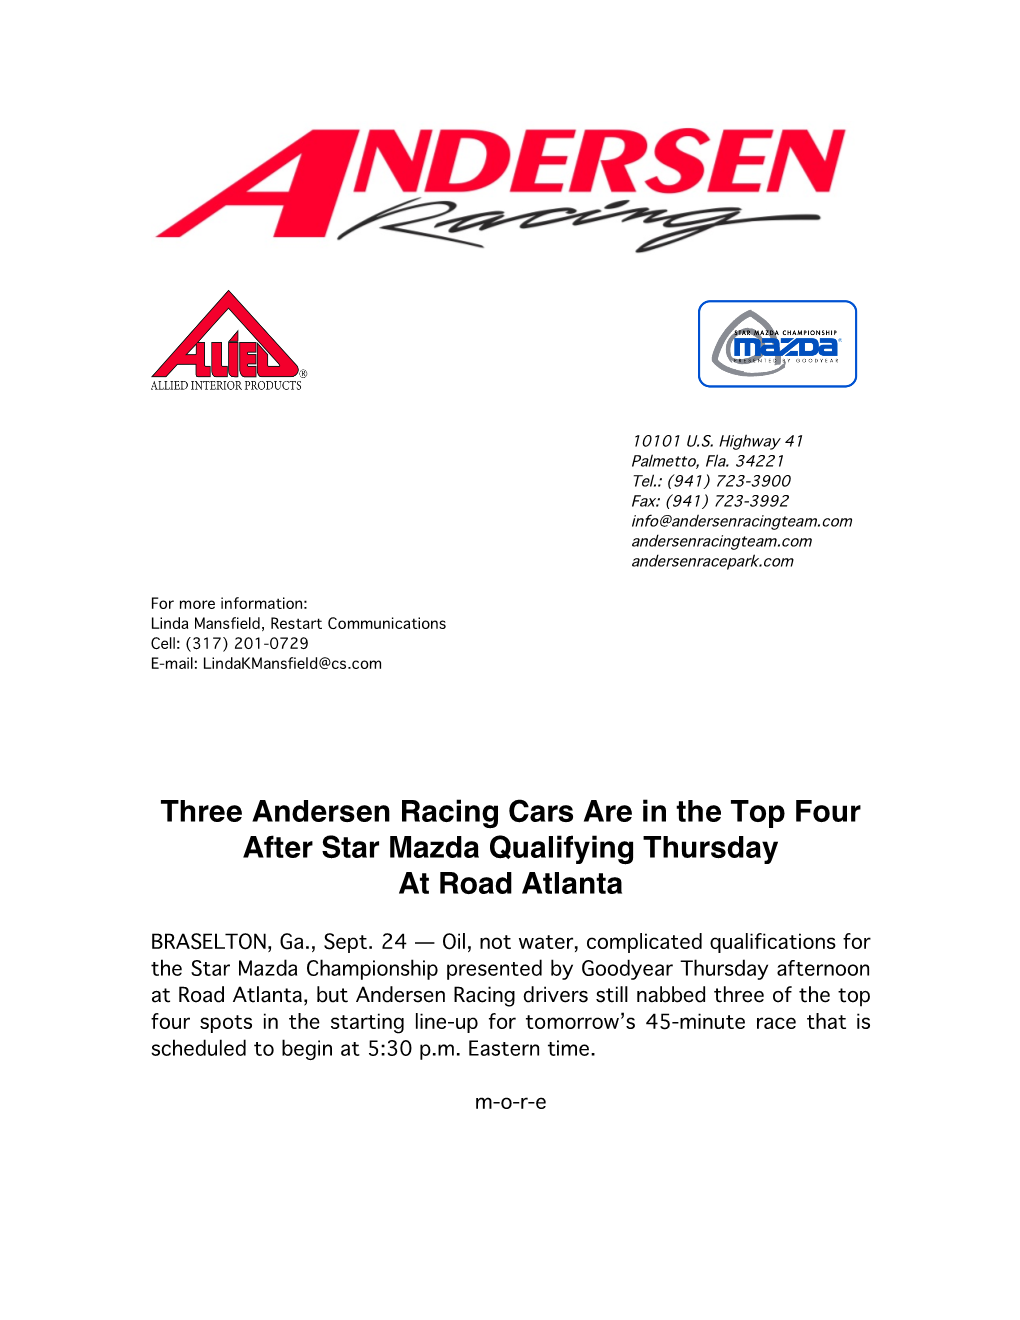 Three Andersen Racing Cars Are in the Top Four After Star Mazda Qualifying Thursday at Road Atlanta